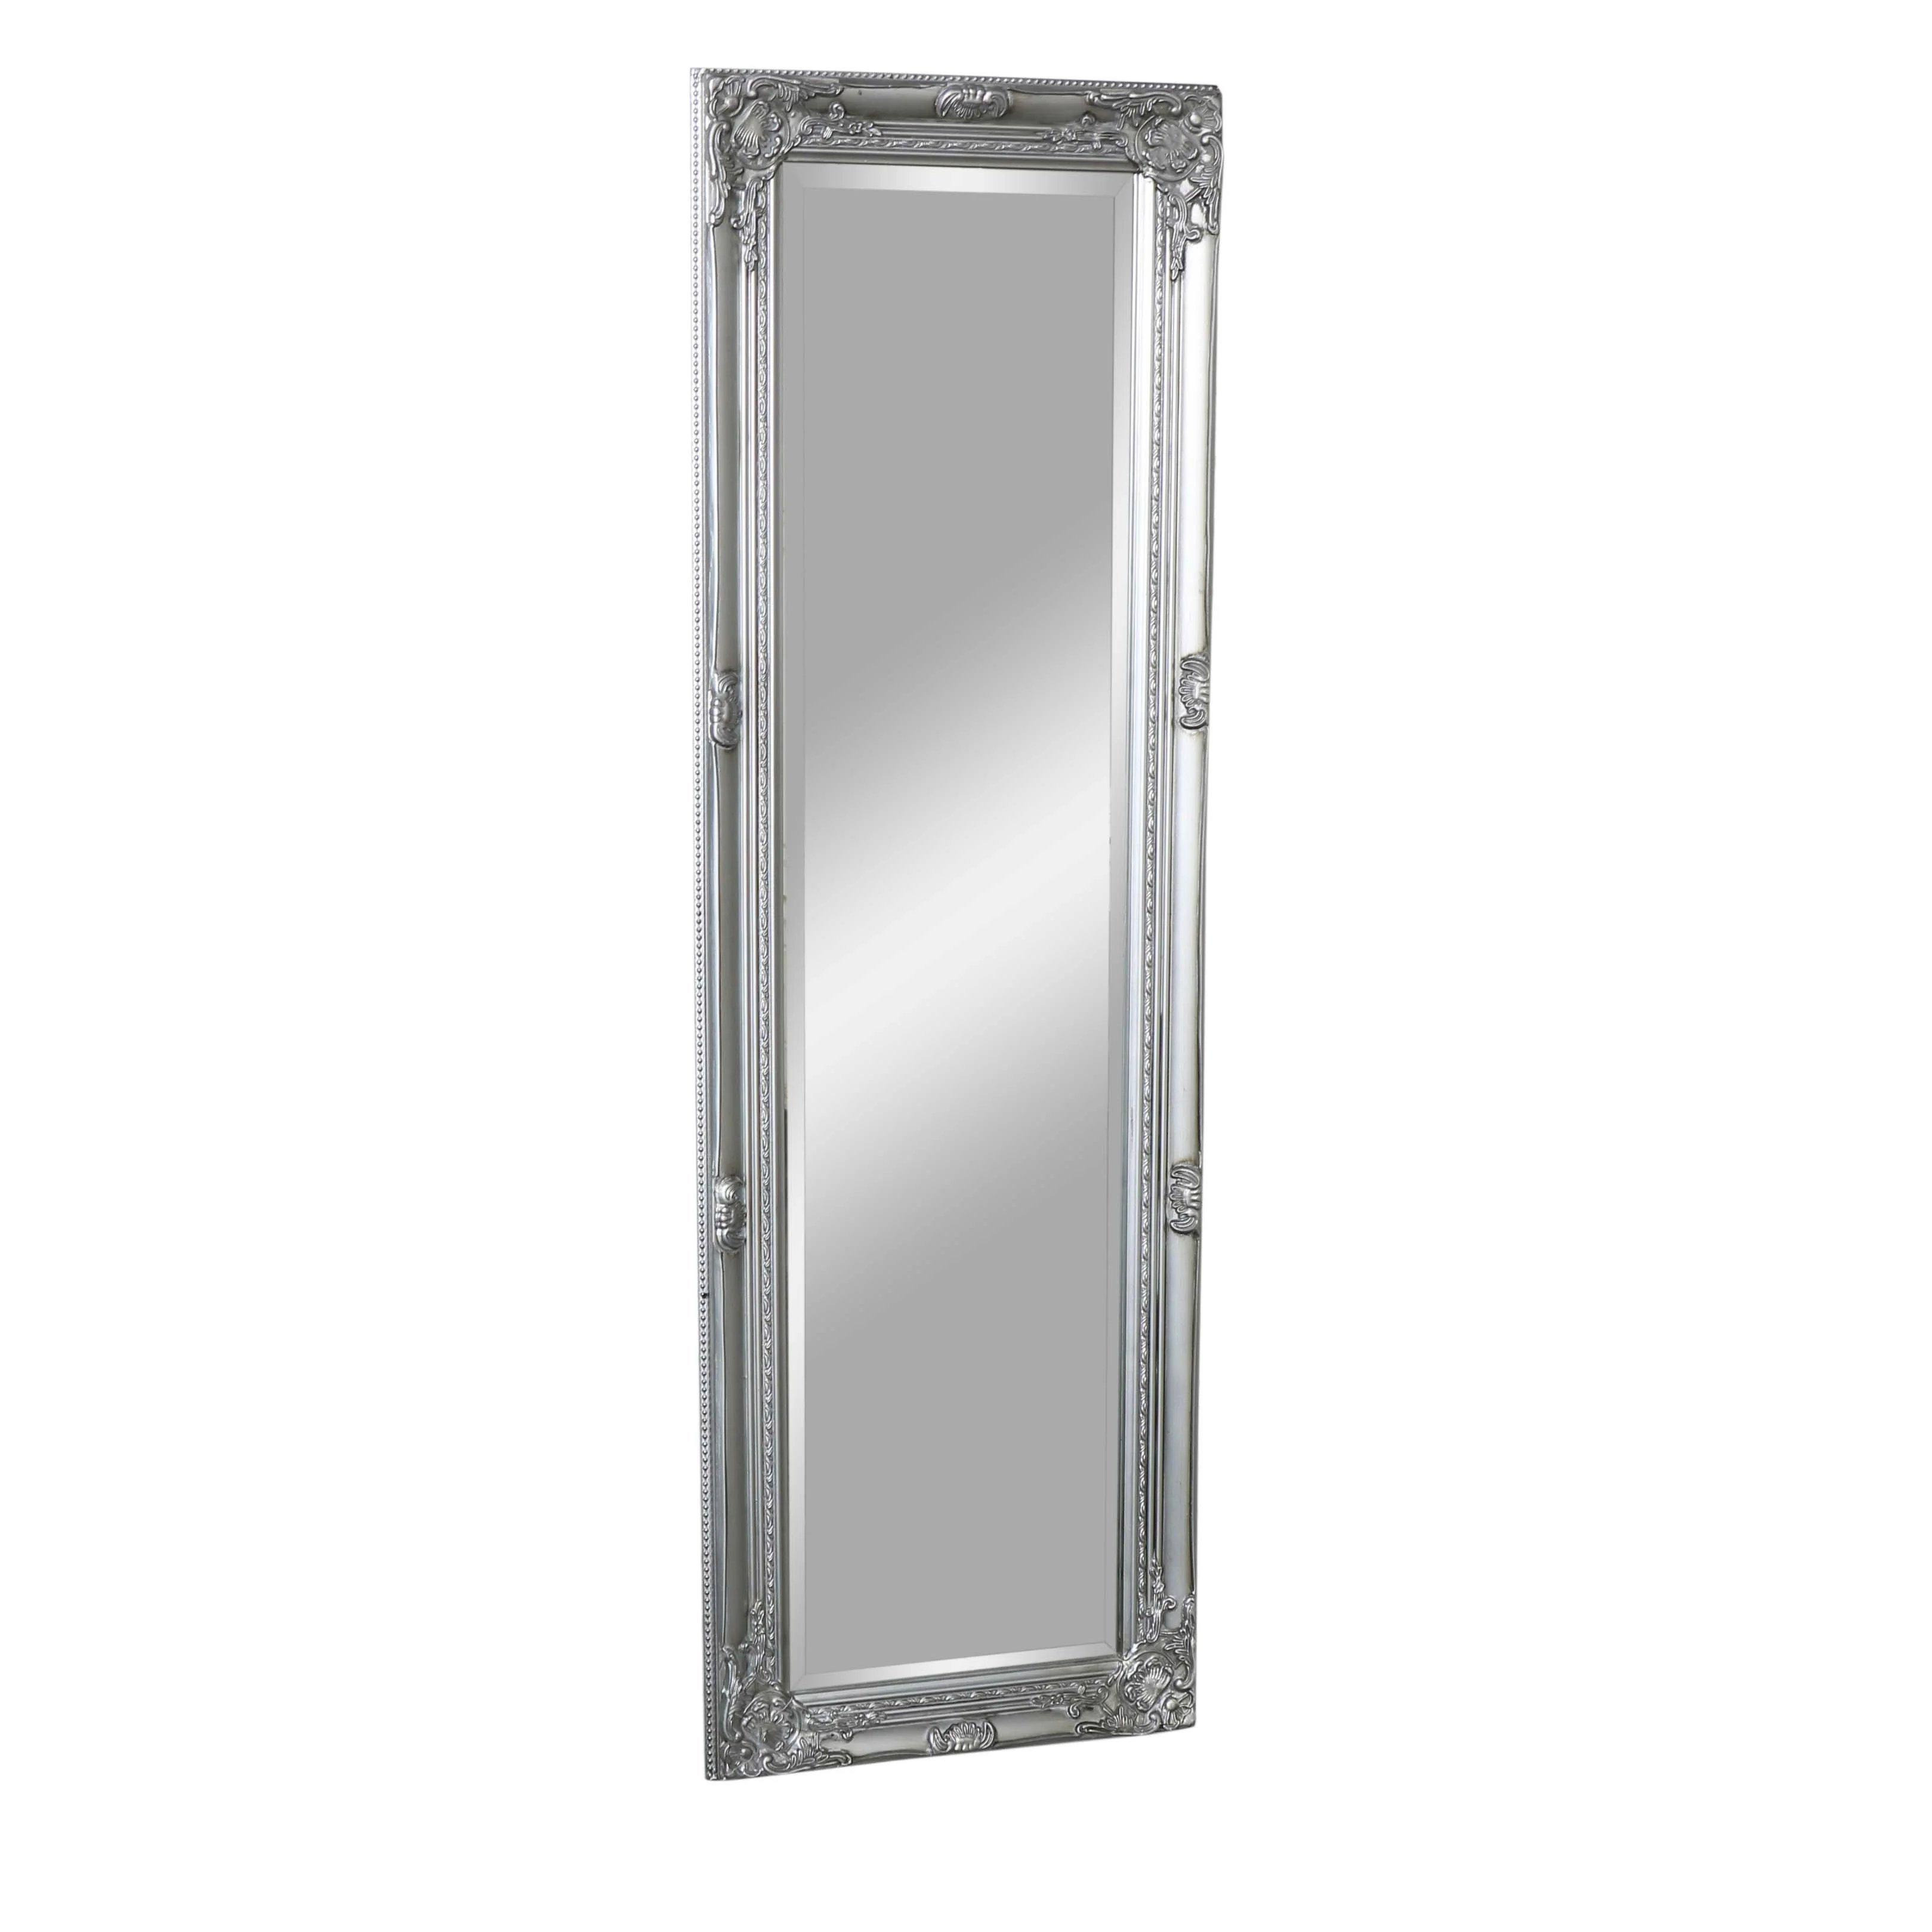 Tall Silver Wall / Leaner Mirror - image 1